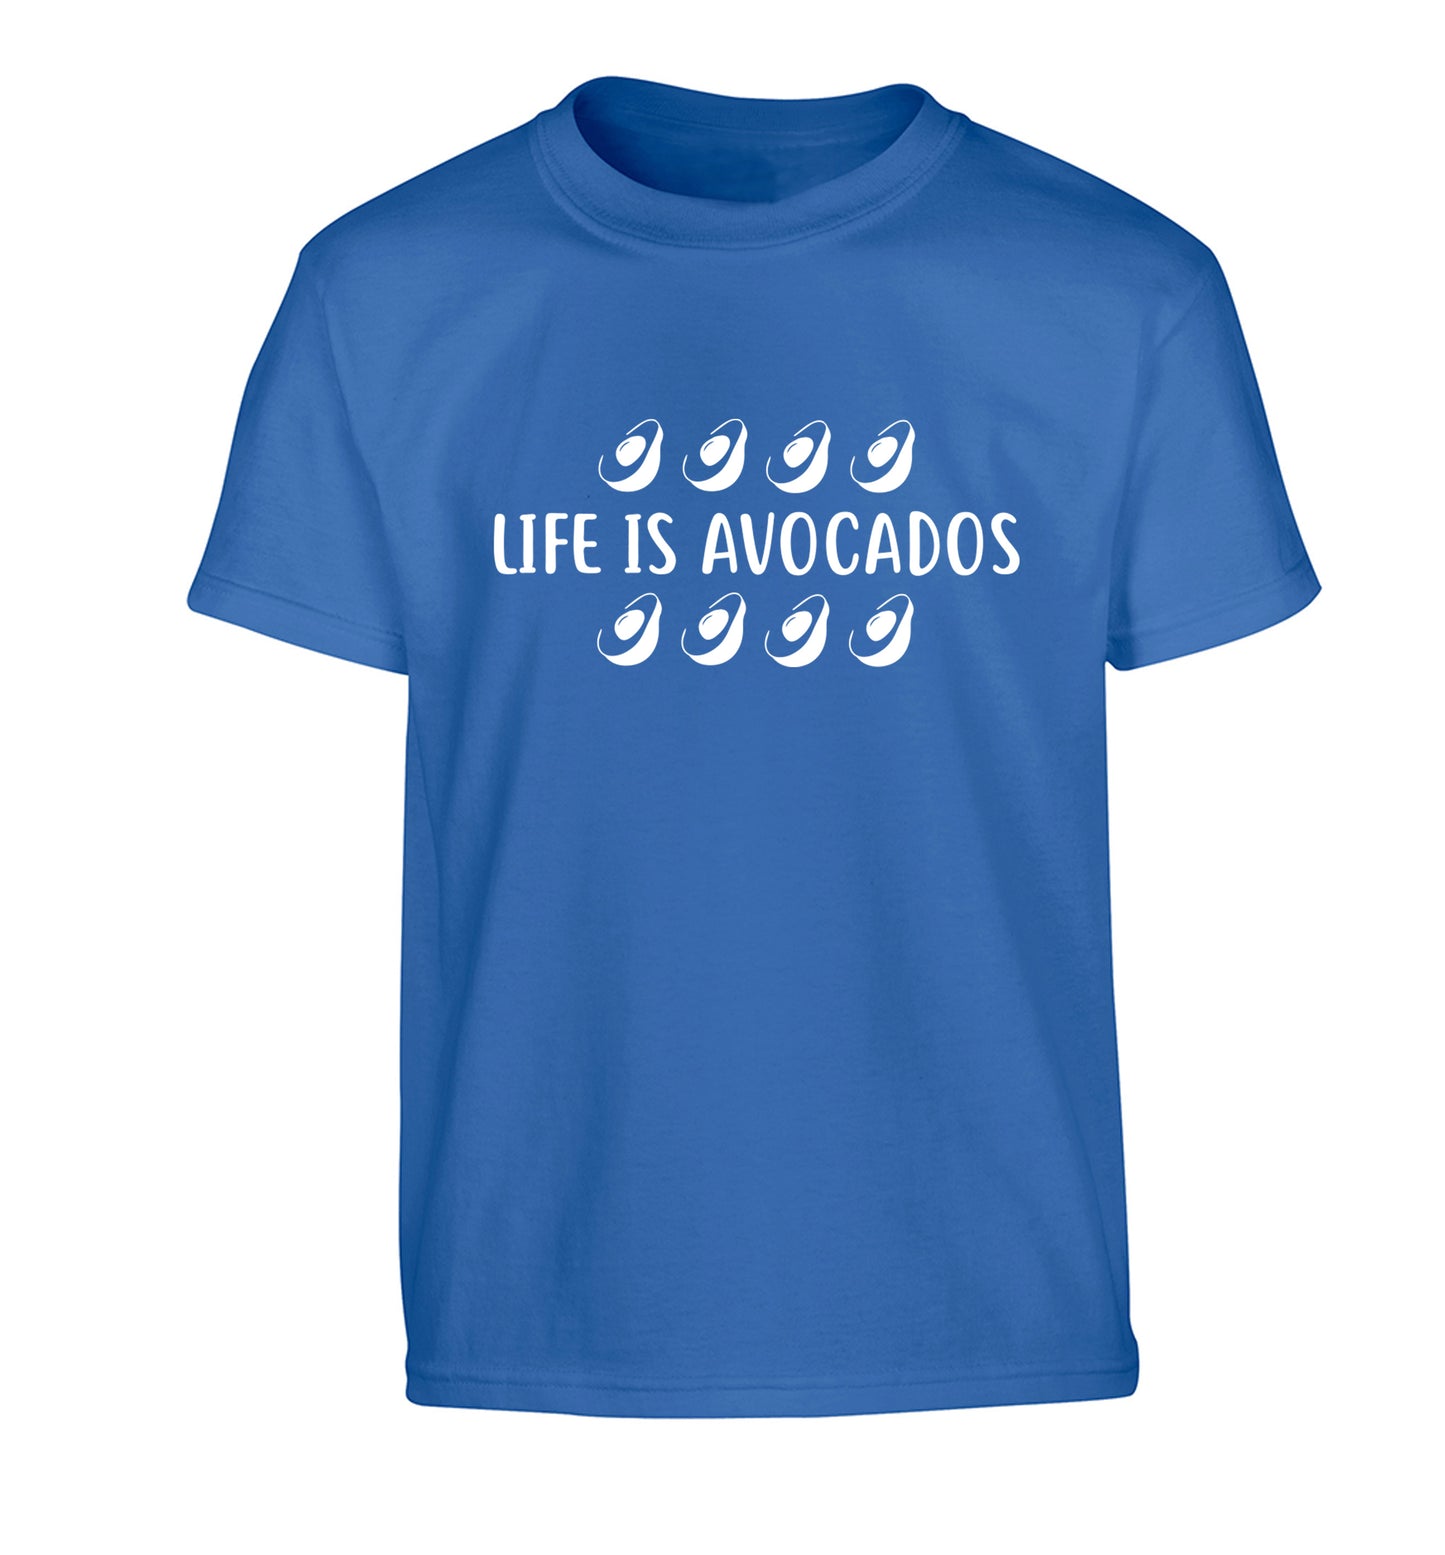 Life is avocados Children's blue Tshirt 12-14 Years